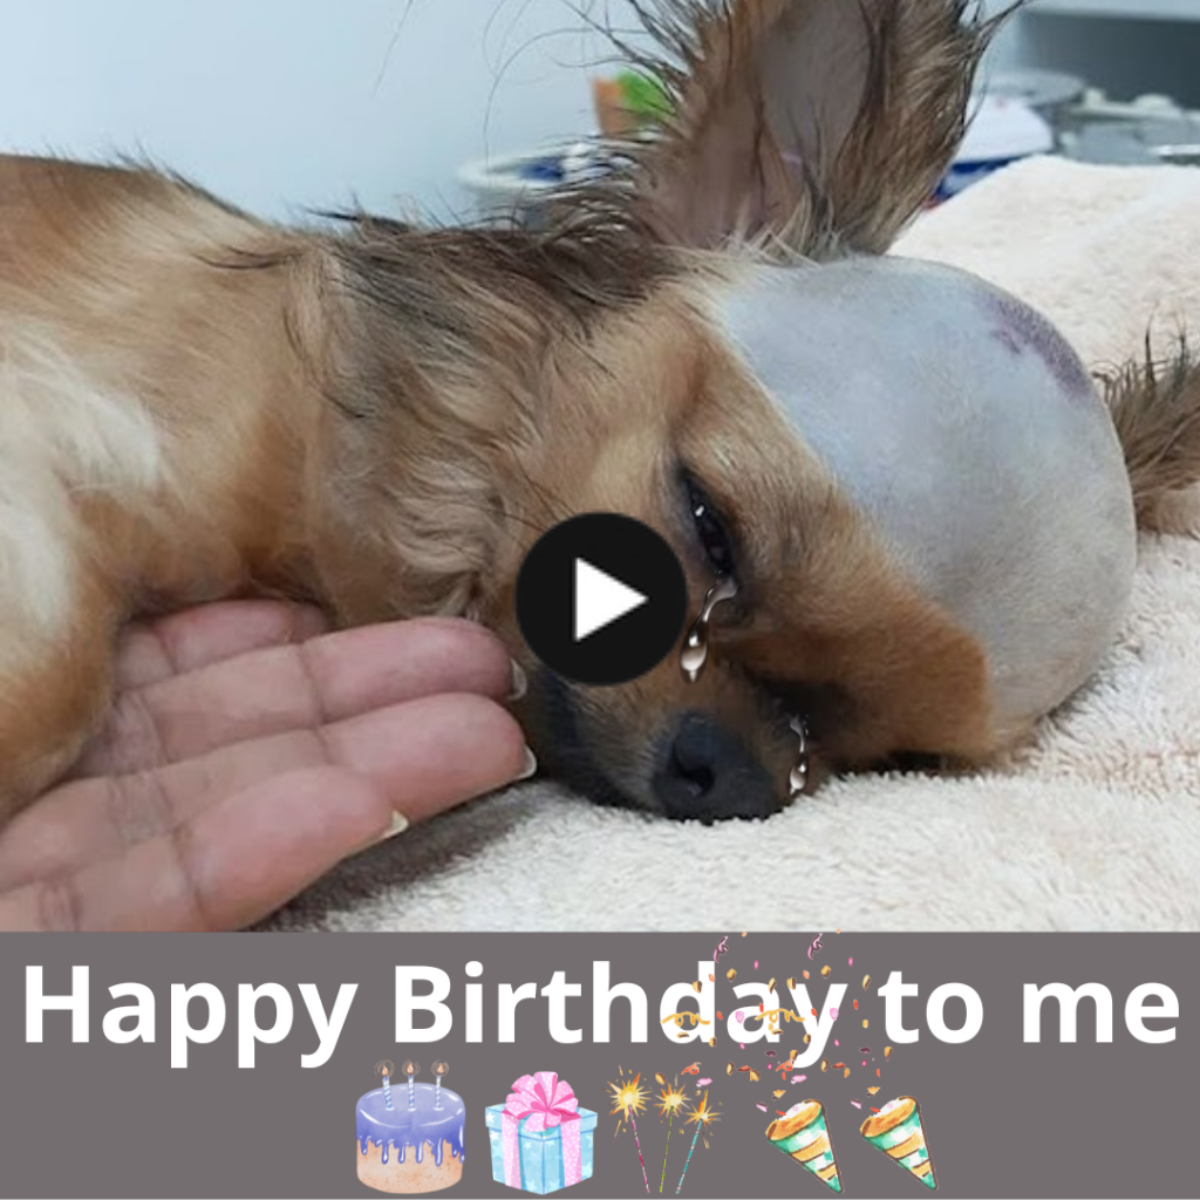 To me, happy birthday! But the fact that no one has granted me a wish makes me feel so alone and miserable—perhaps because I’m an ugly dog?